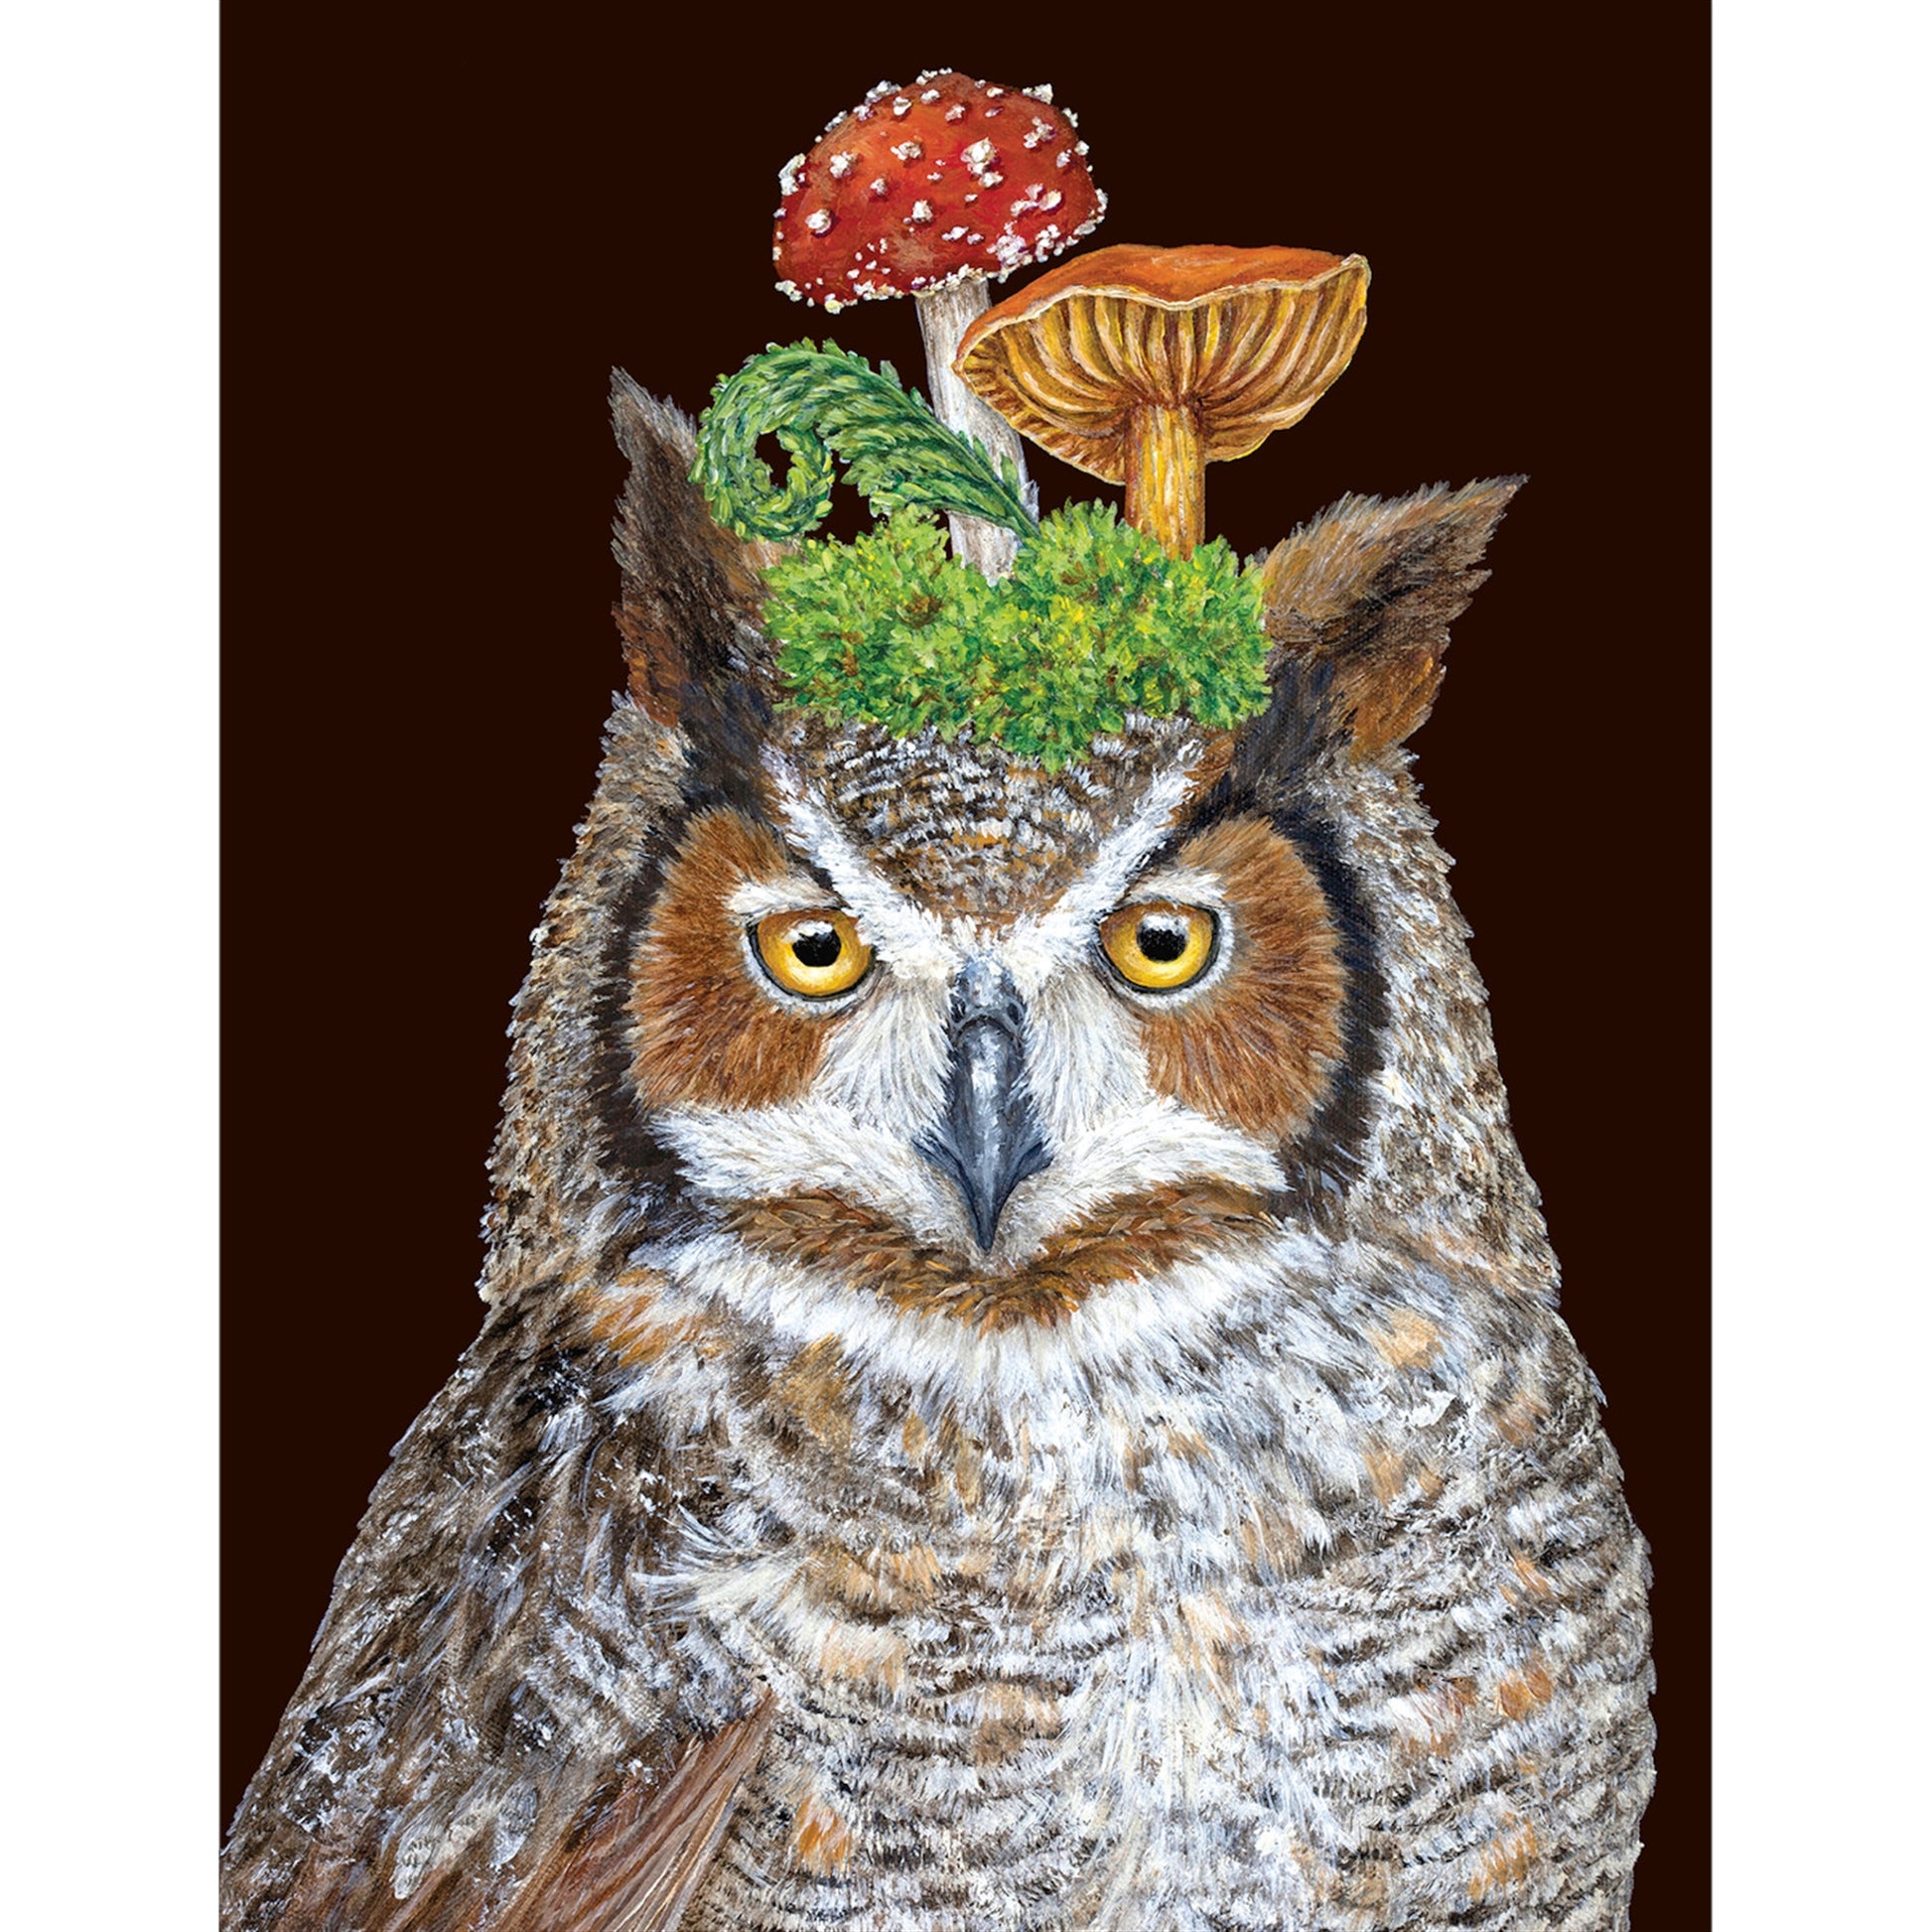 With his jaunty cap of mushrooms Woody the Owl makes a delightful card to give and receive.  